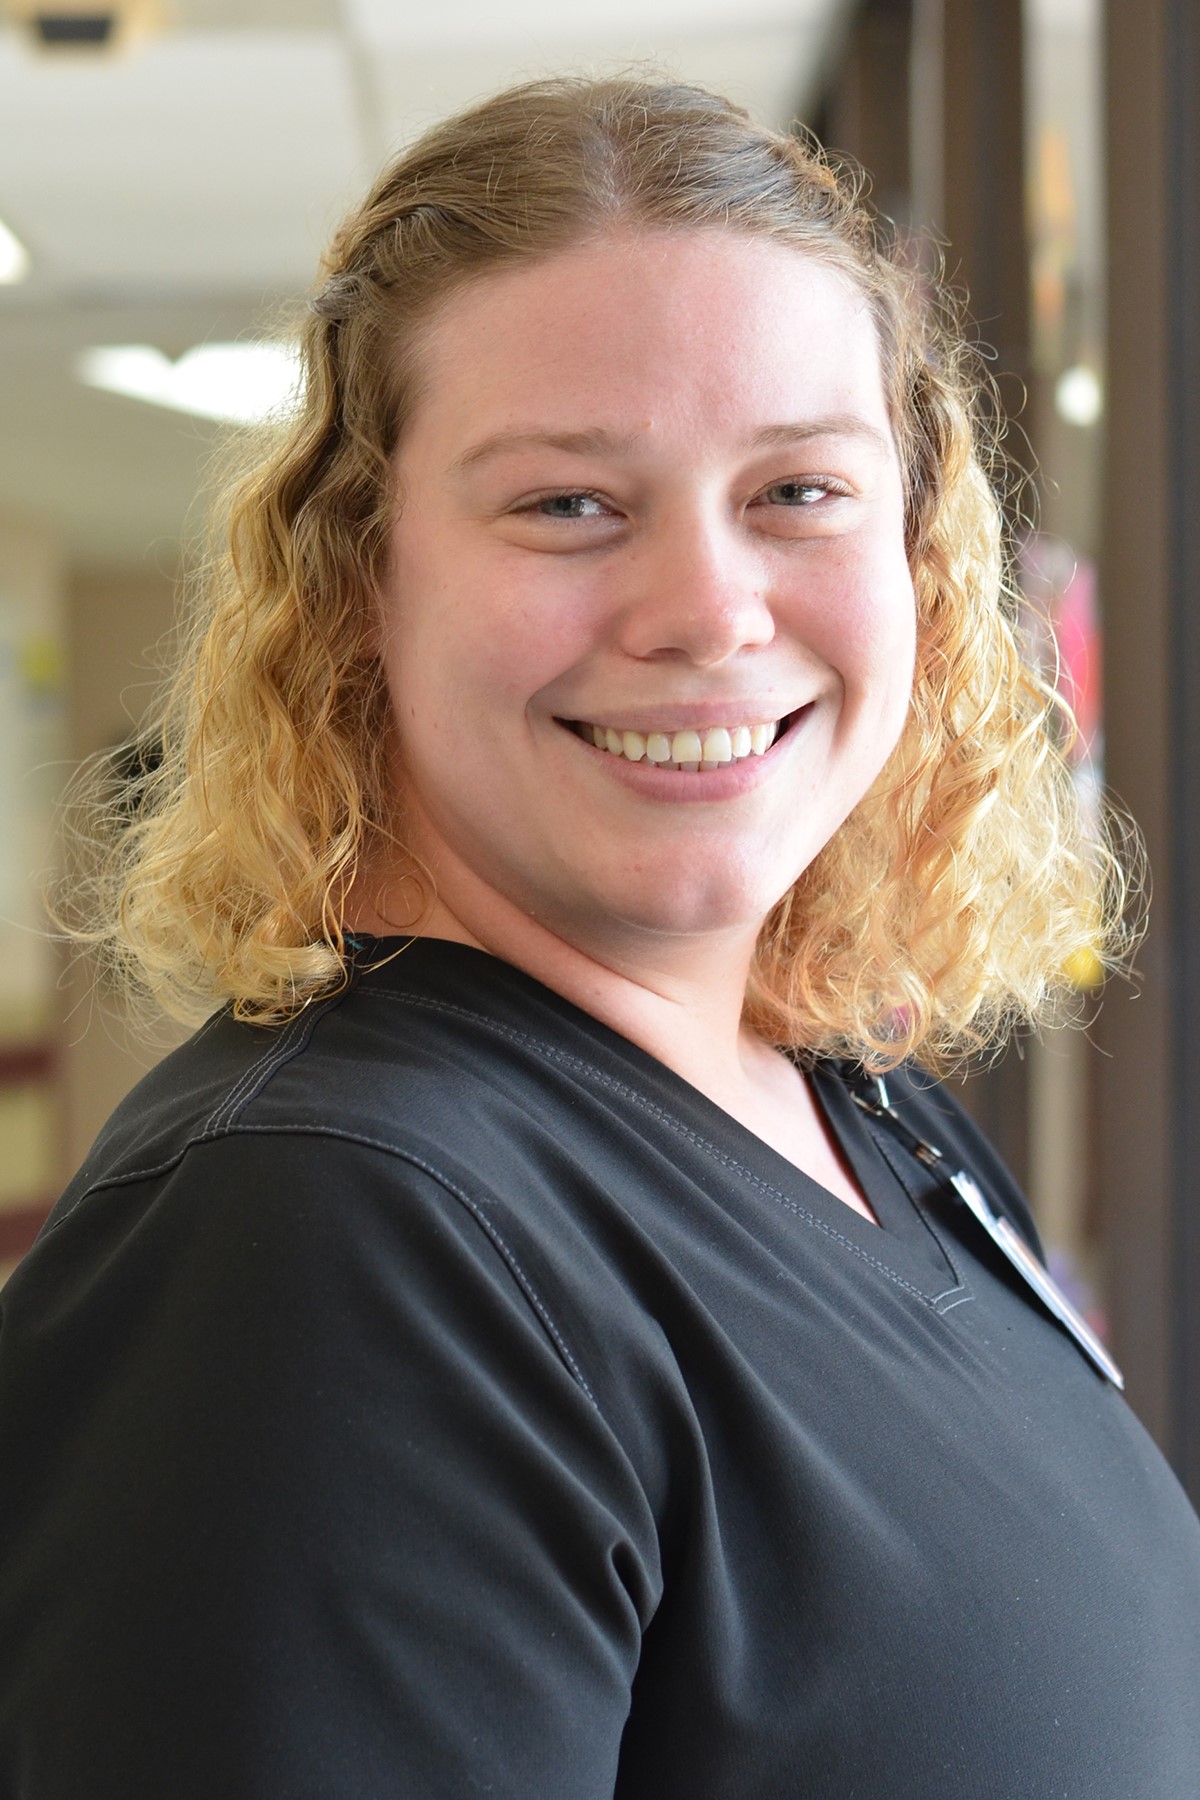 M. Allyson Eades, MS, CCC-SLP, of Bracey, has five years of experience, the last two of which have been at The Hundley Center, the long-term care and skilled nursing facility in South Hill.